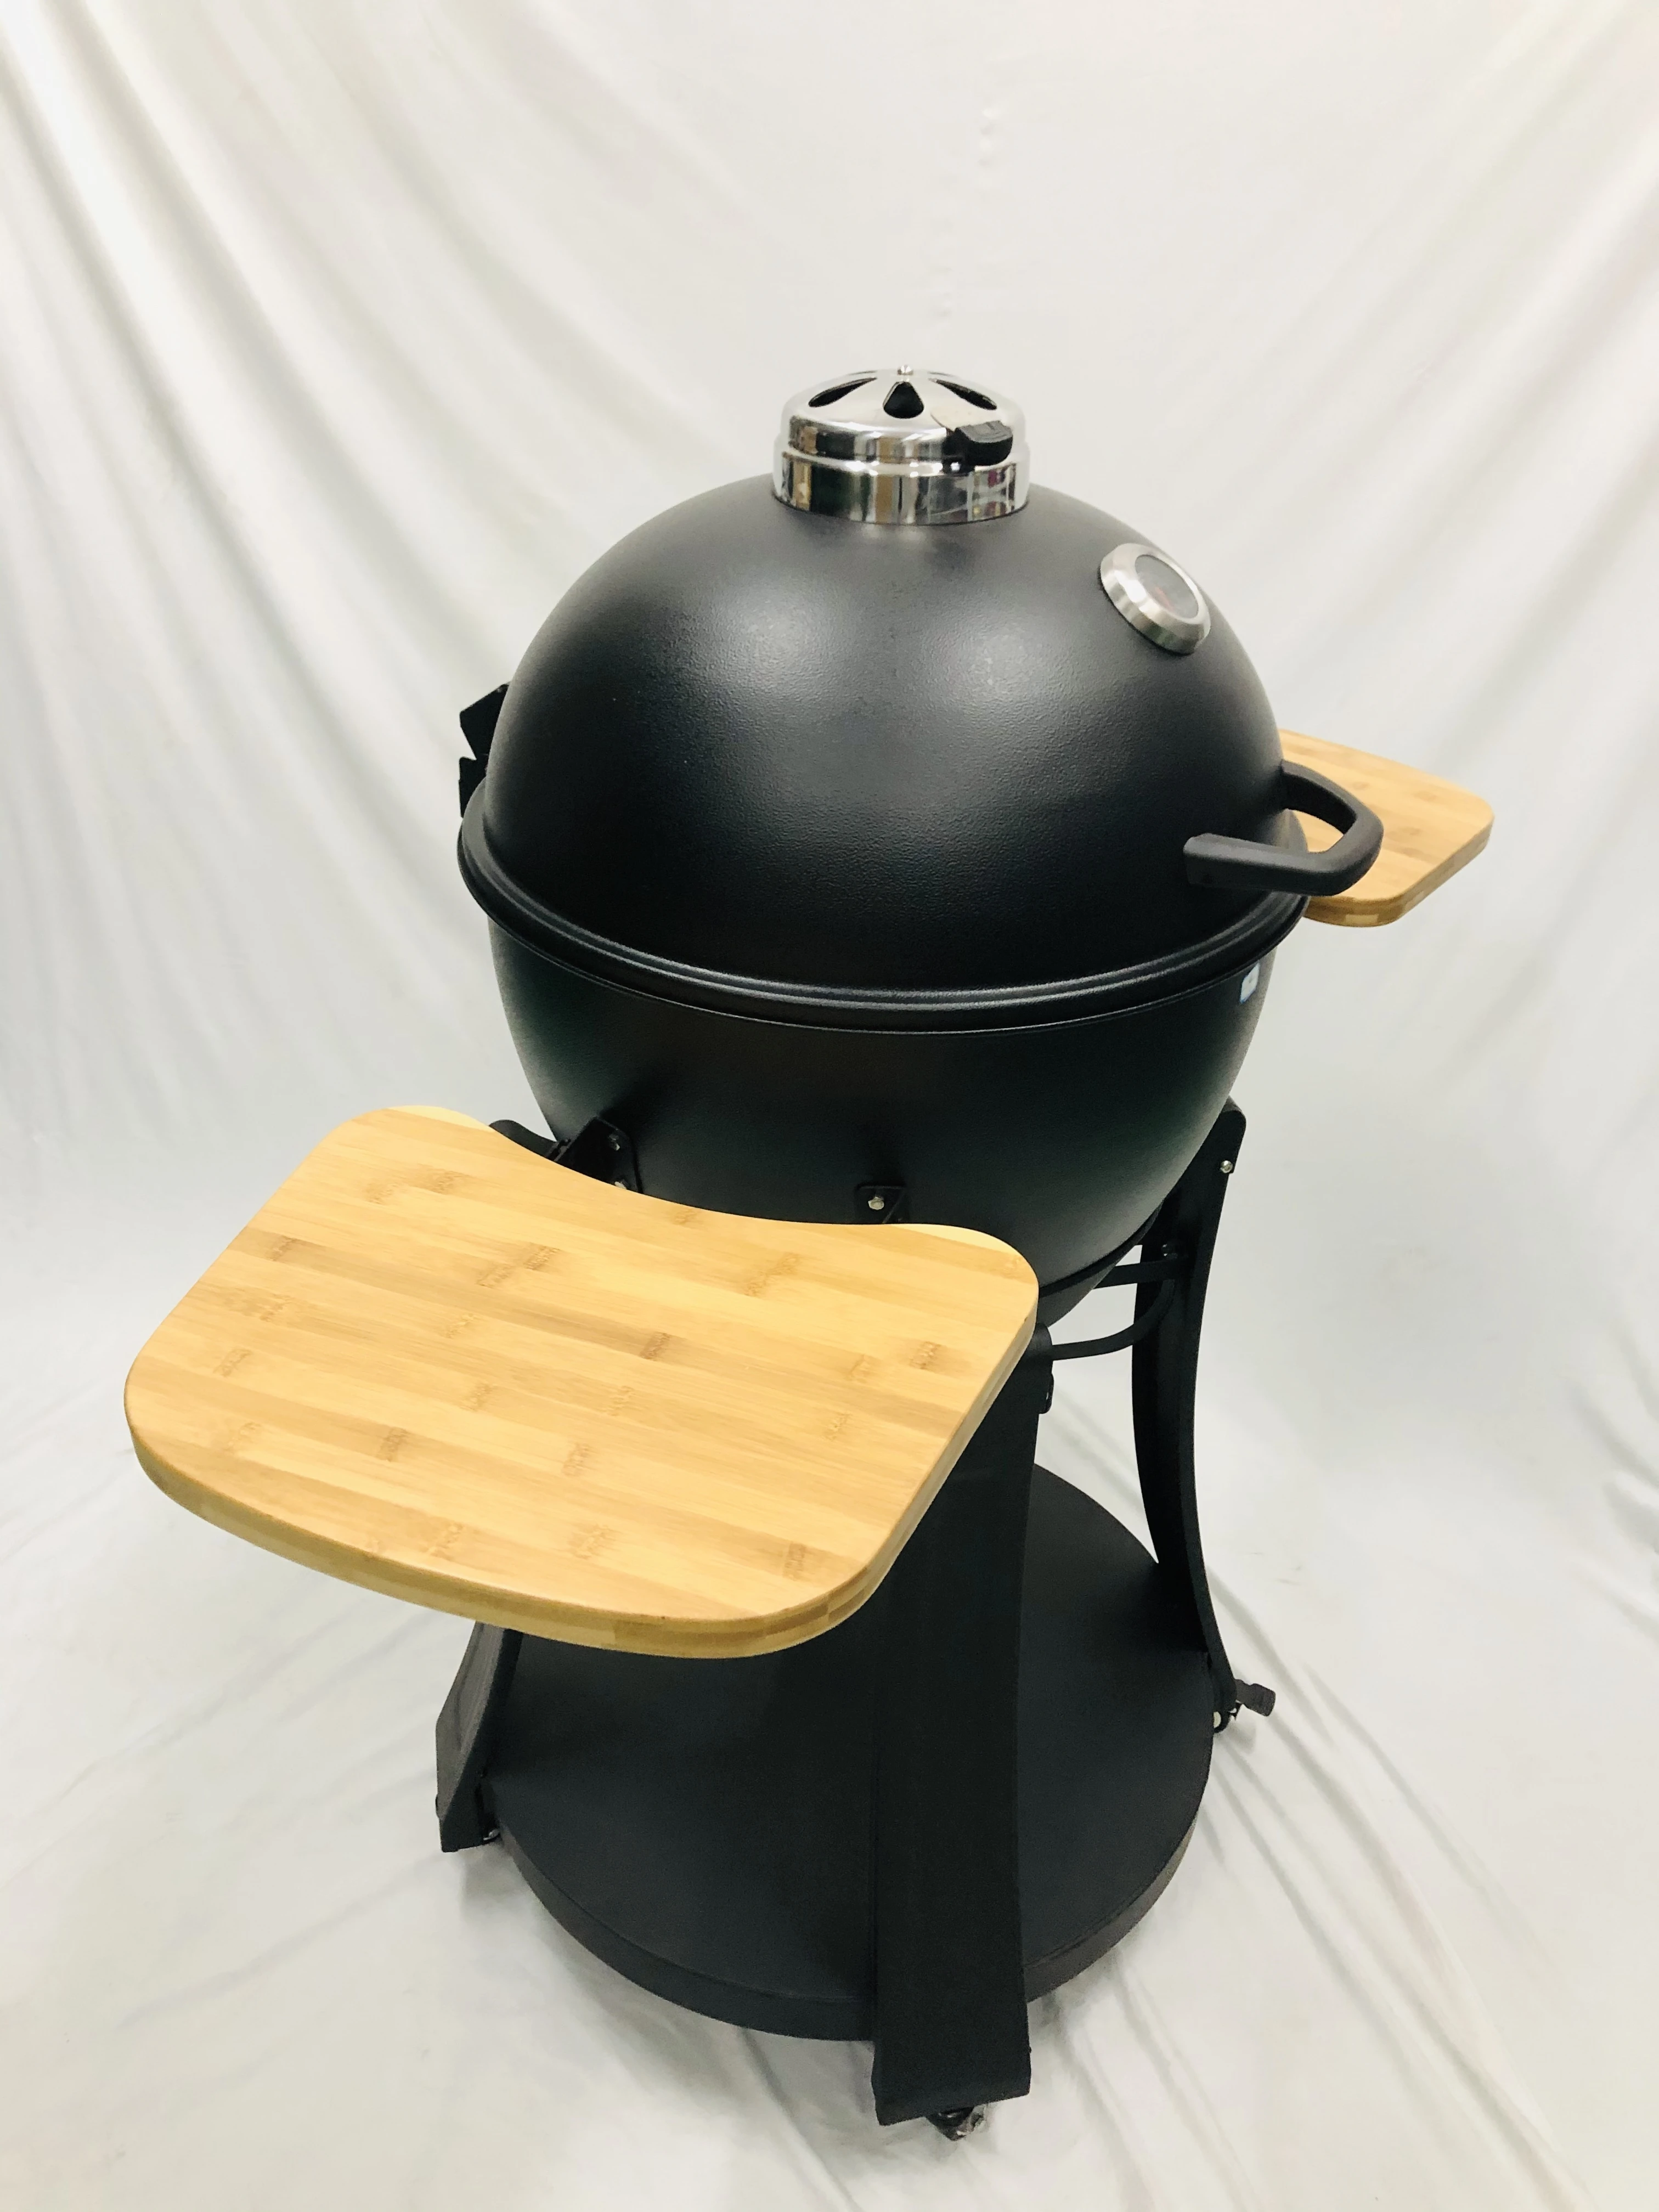 21 Inch Large Outdoor Kitchen Clay Oven Charcoal BBQ Barbeque Grill Kamado